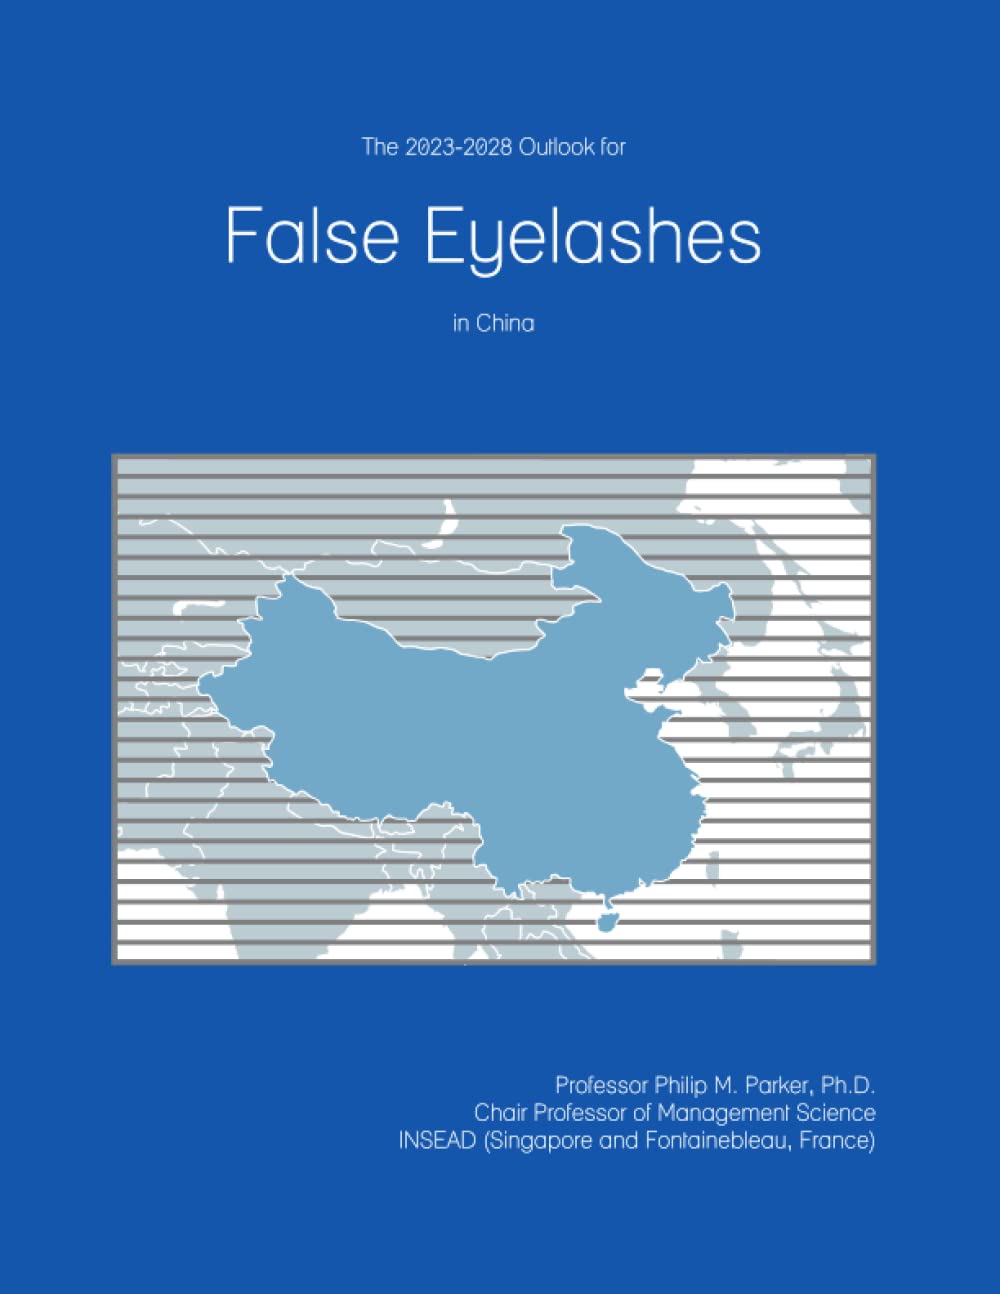 The 2023-2028 Outlook for False Eyelashes in China     Paperback – August 16, 2022